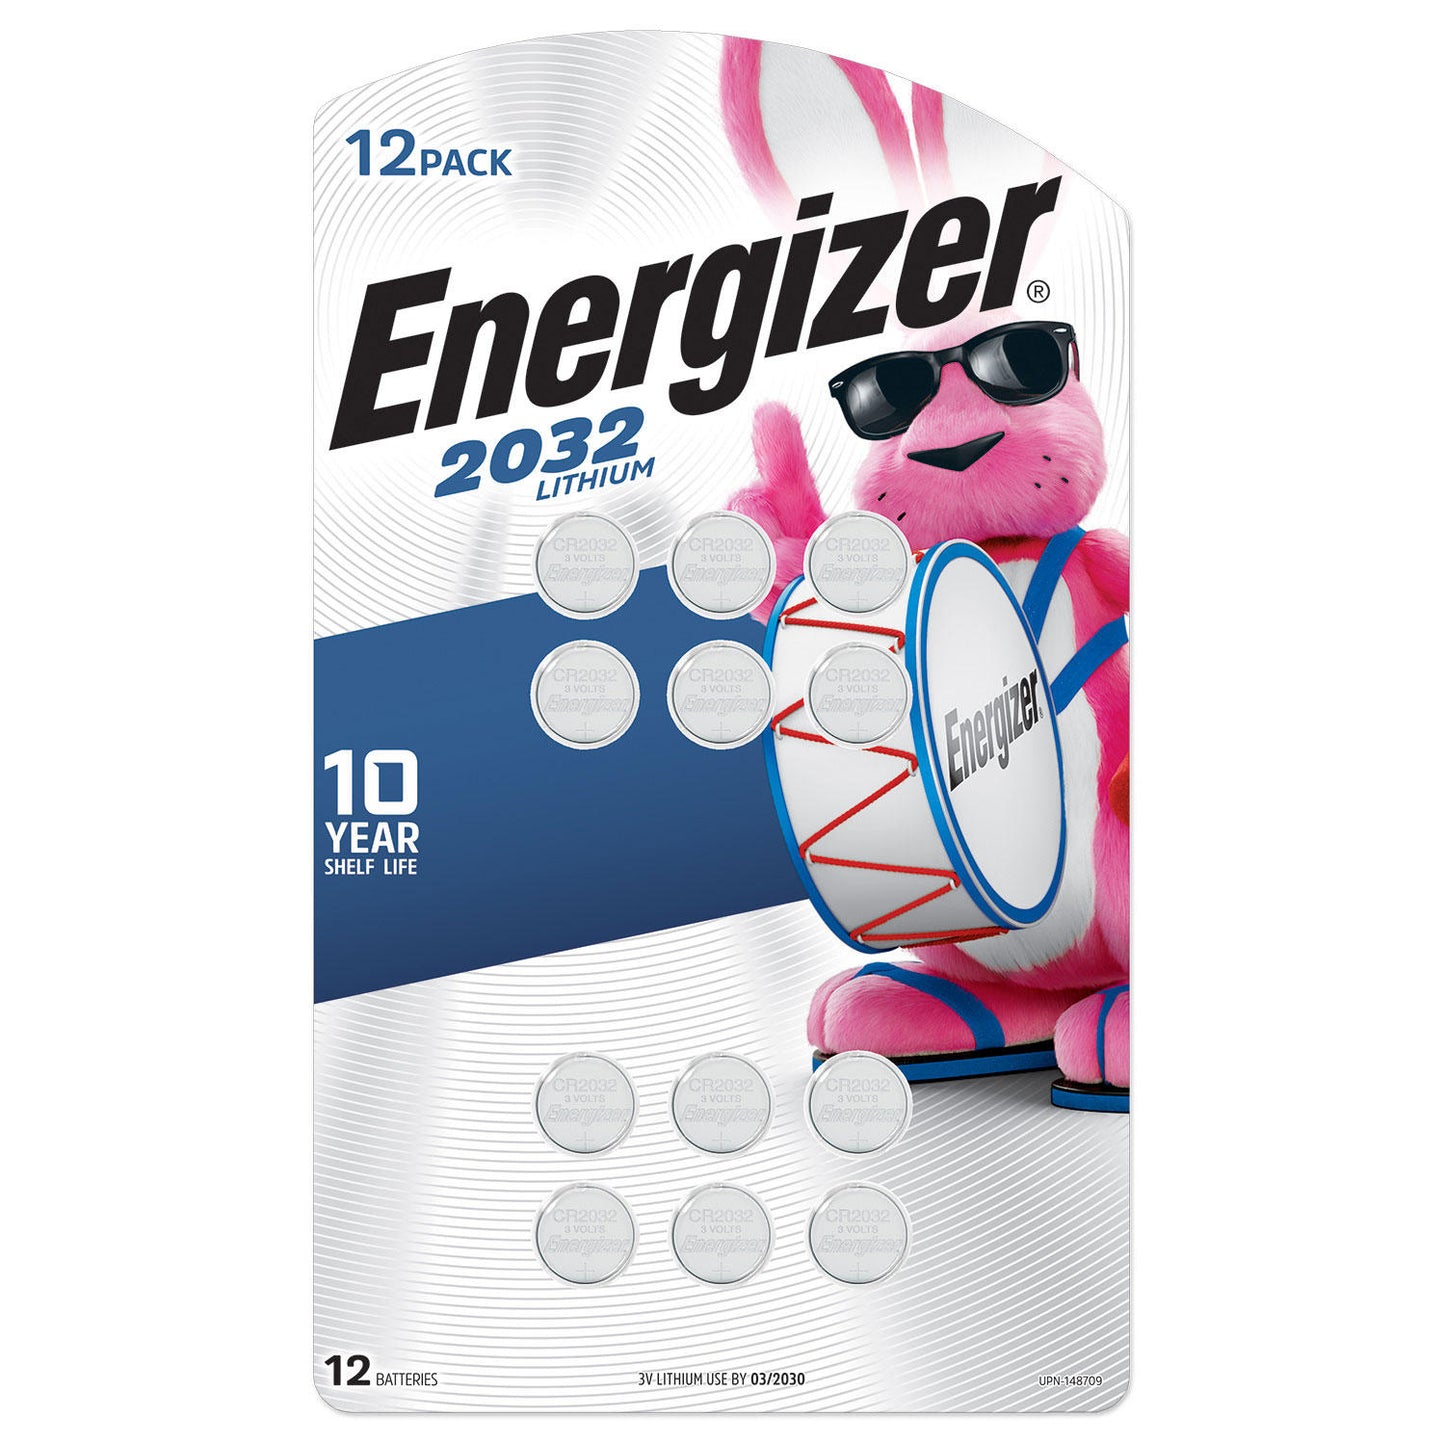 Energizer 2032 Lithium Coin Battery, 6 Pack